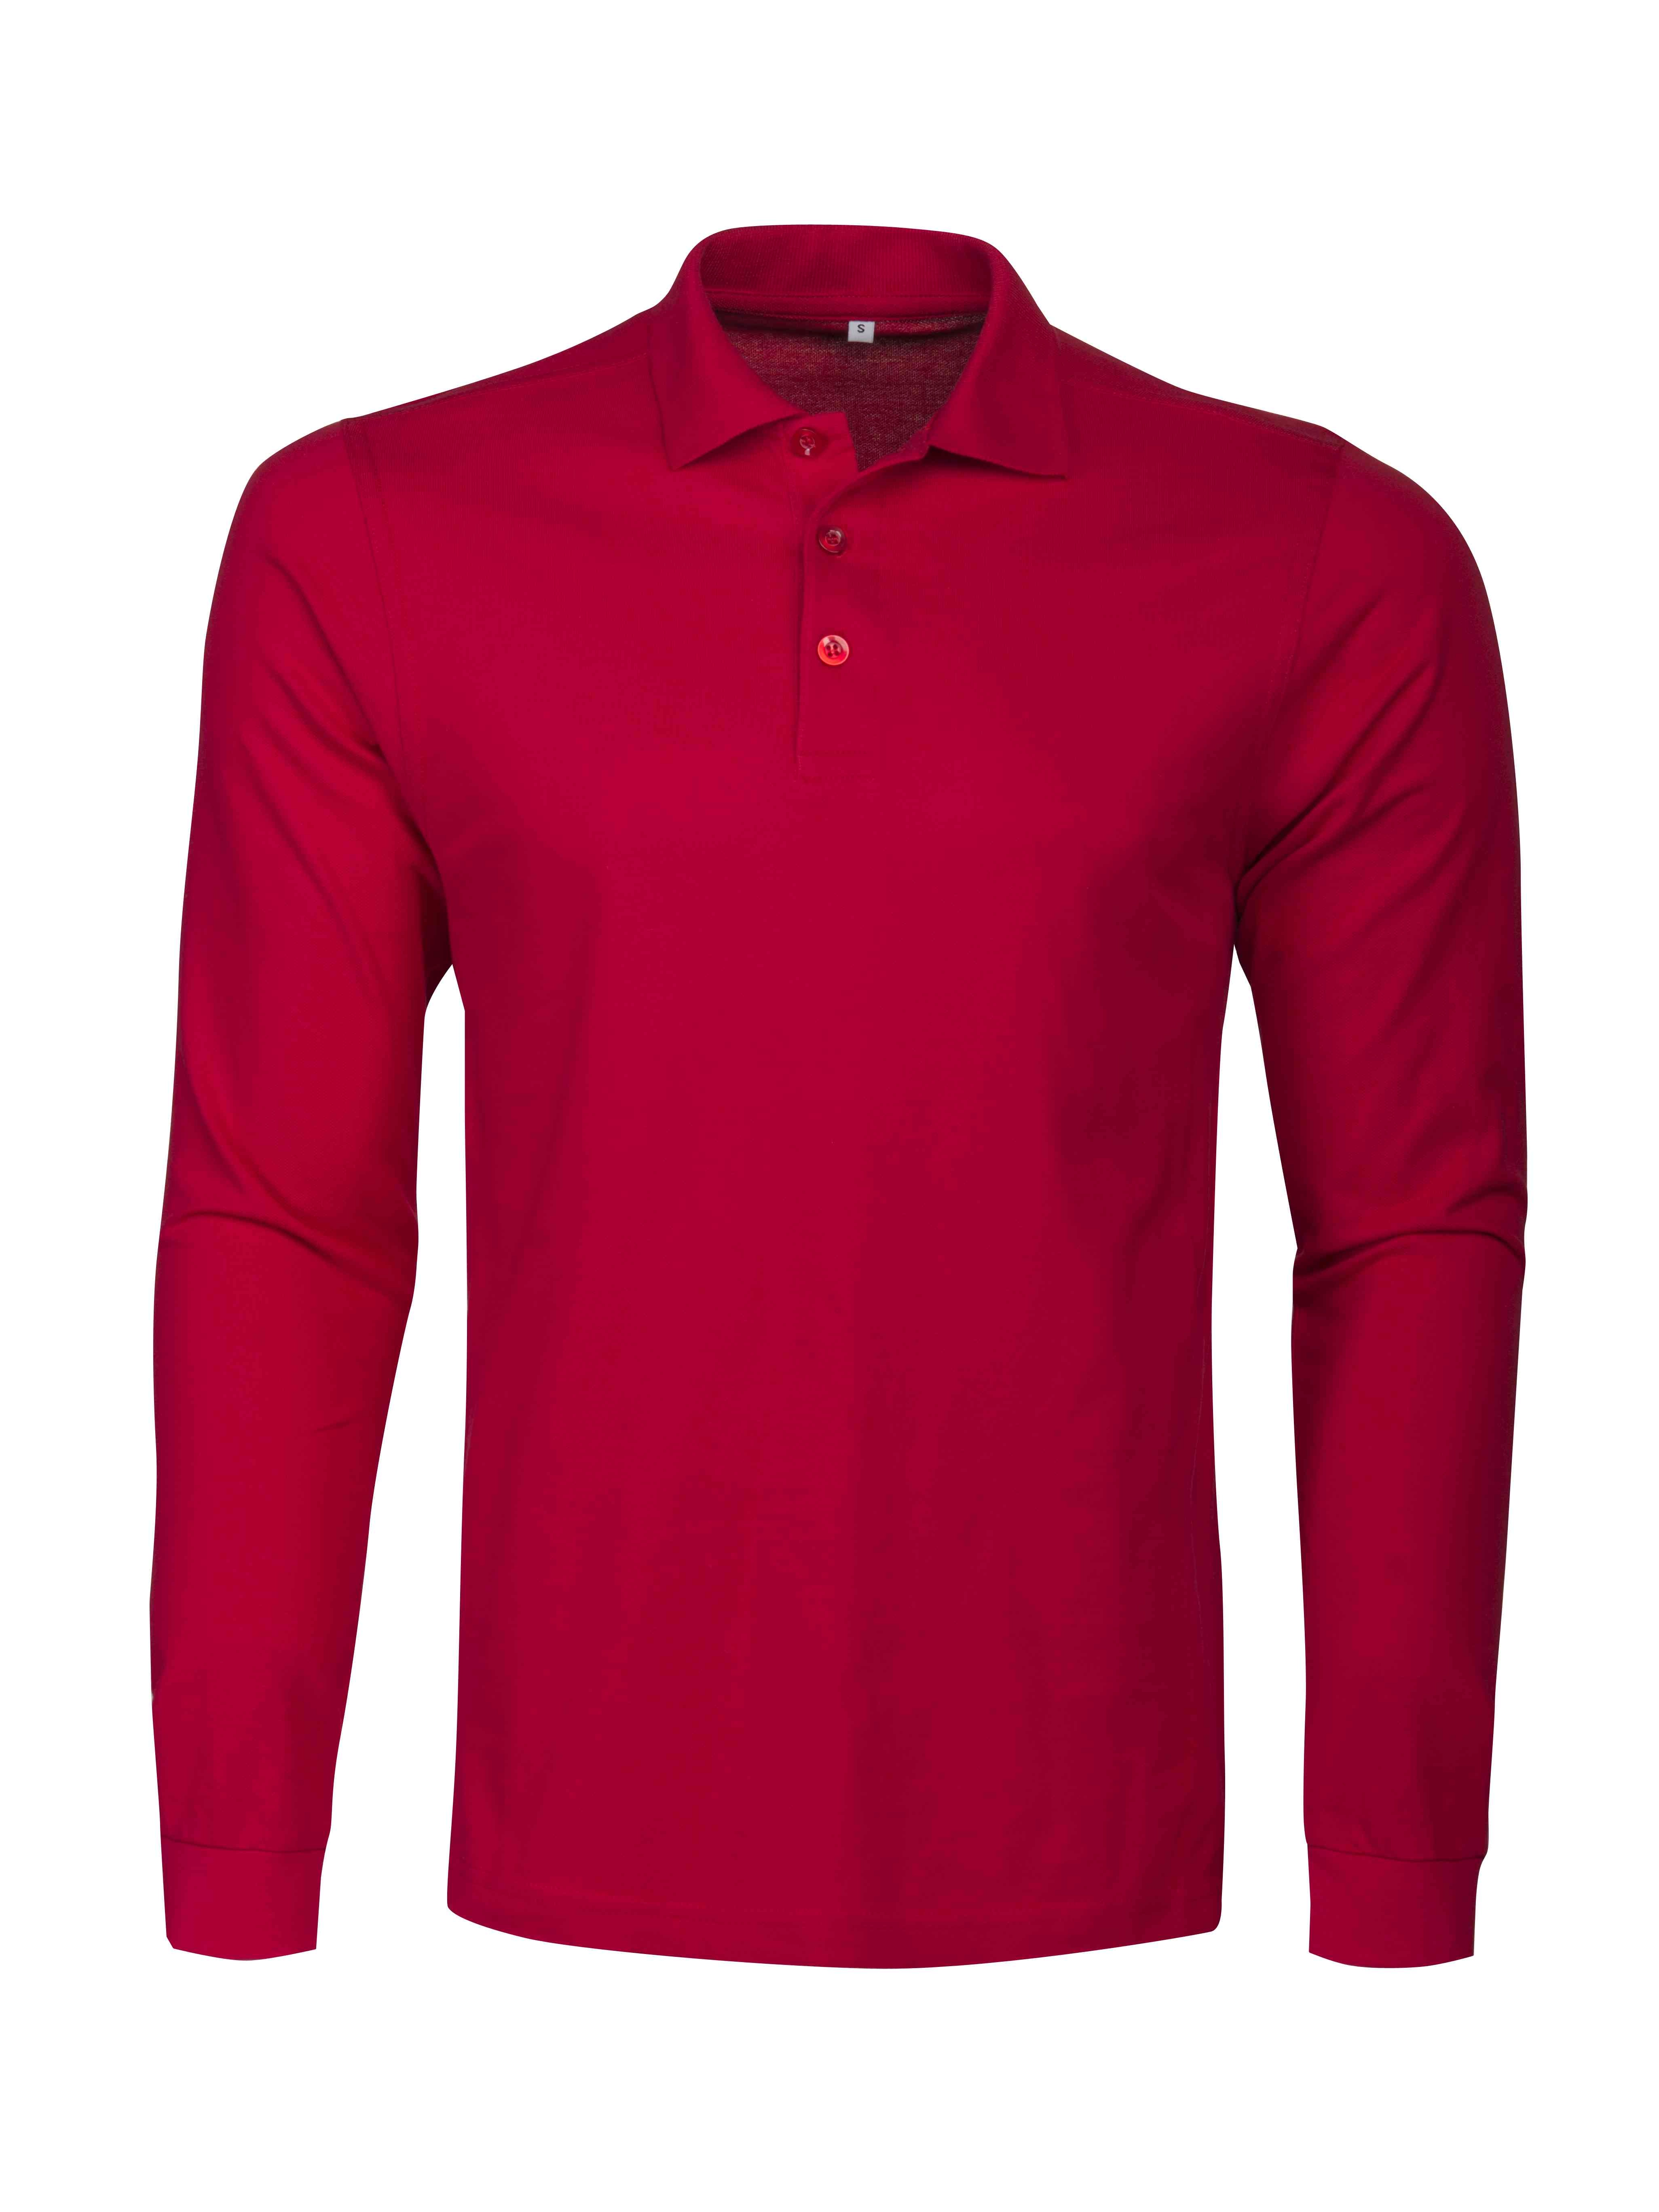 SURF POLO RSX L/S RED PE-2265011-400-8